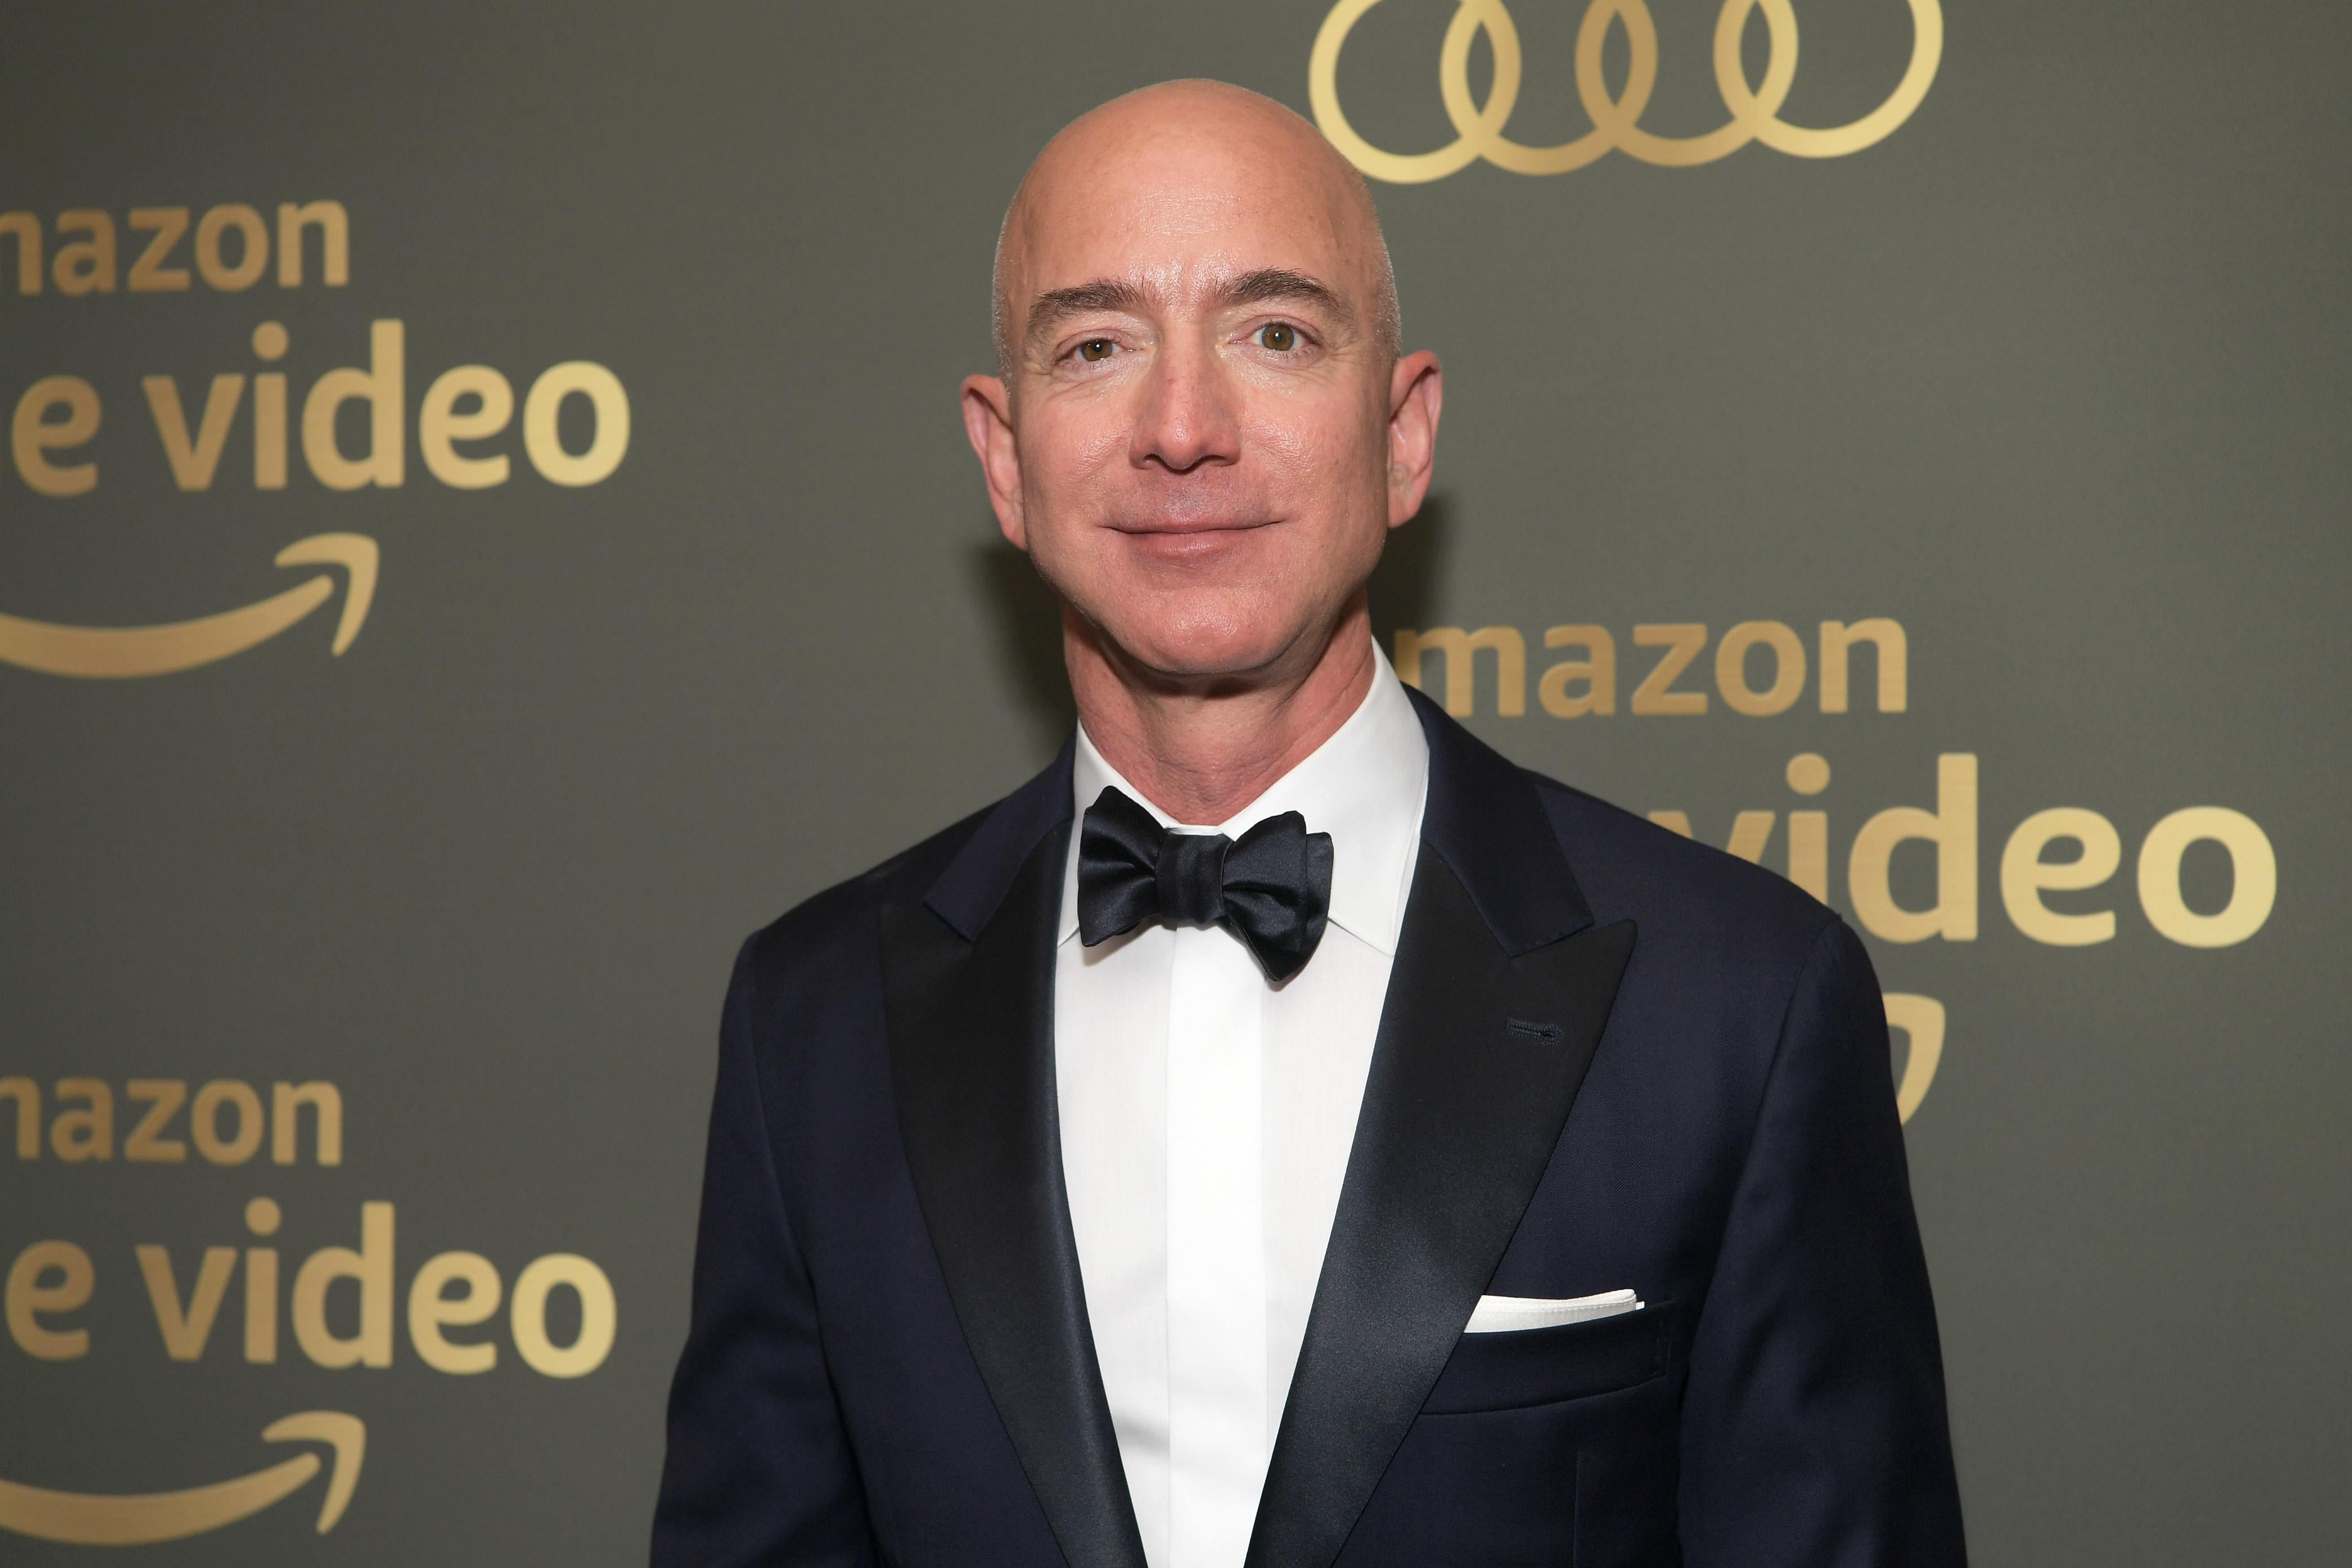 The National Enquirer tried to blackmail Jeff Bezos with threat to publish  racy selfies sent to mistress.